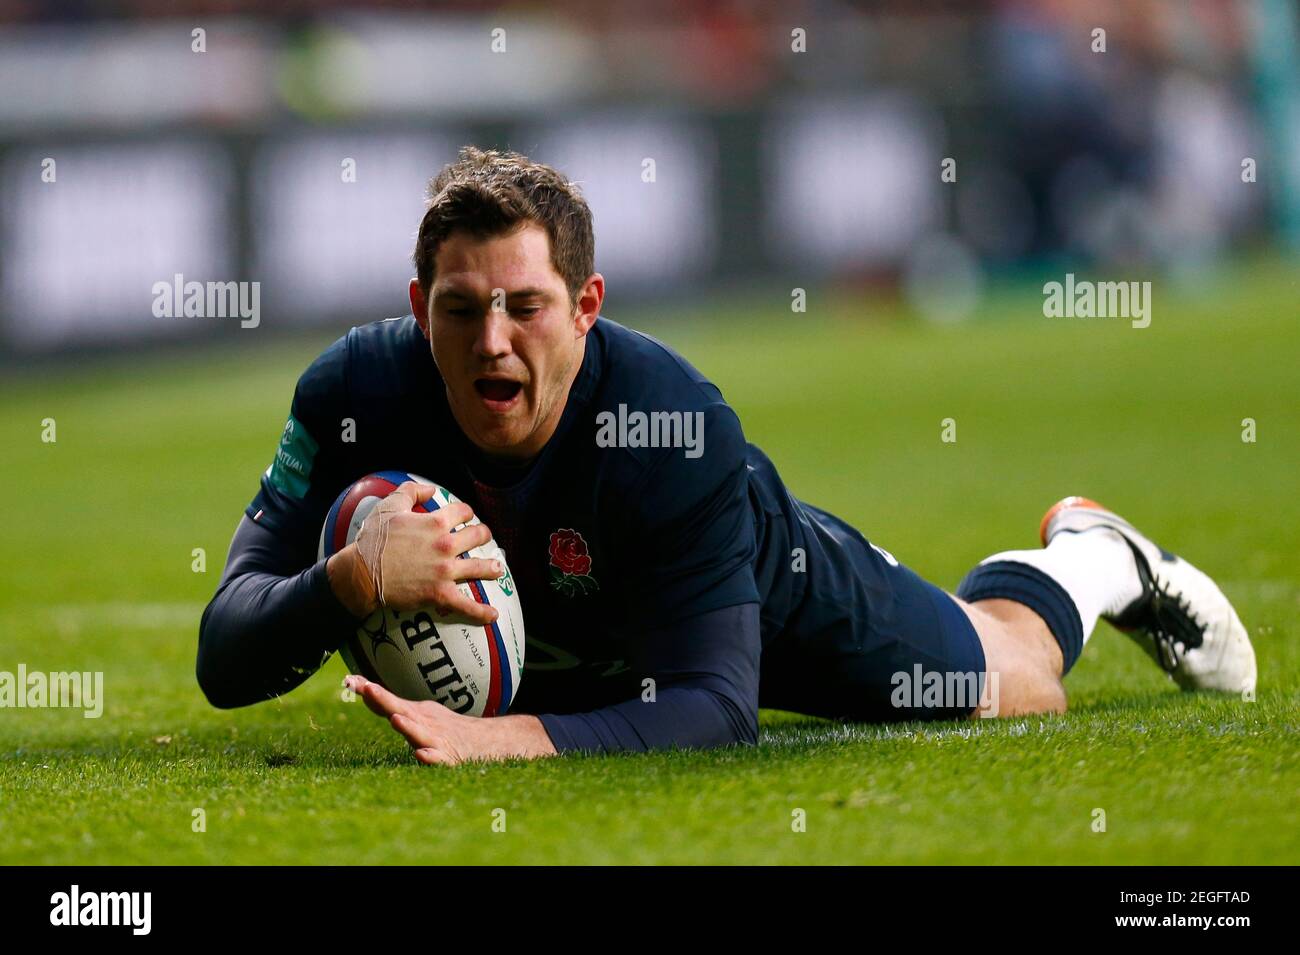 Britain Rugby Union - England v Fiji - 2016 Old Mutual Wealth Series - Twickenham Stadium, London, England - 19/11/16 England's Alex Goode scores a try Reuters / Andrew Winning Livepic EDITORIAL USE ONLY. Stock Photo